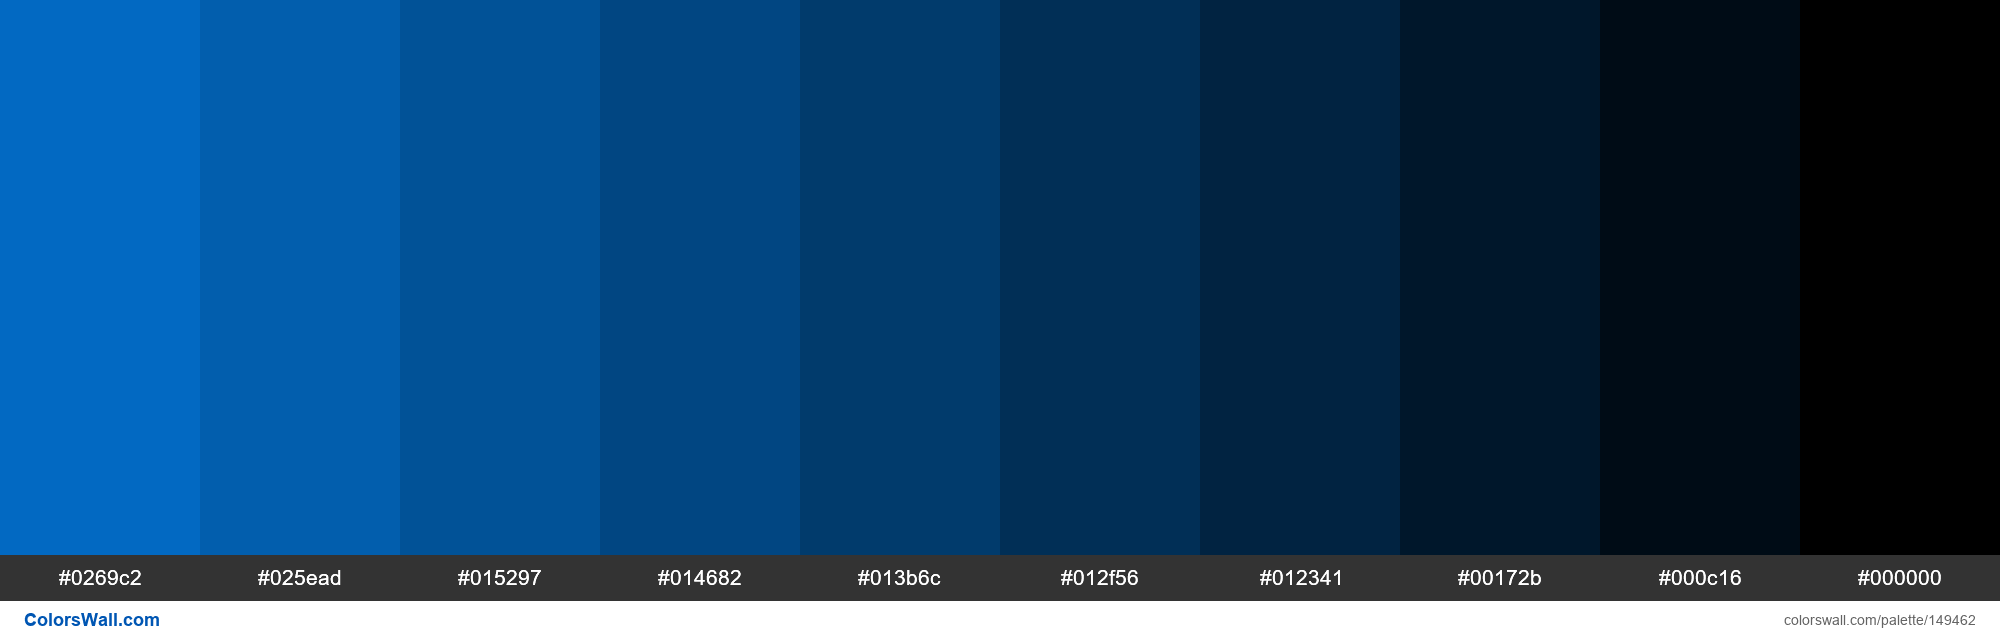 Bootstrap 4 primary blue shades colors palette - ColorsWall